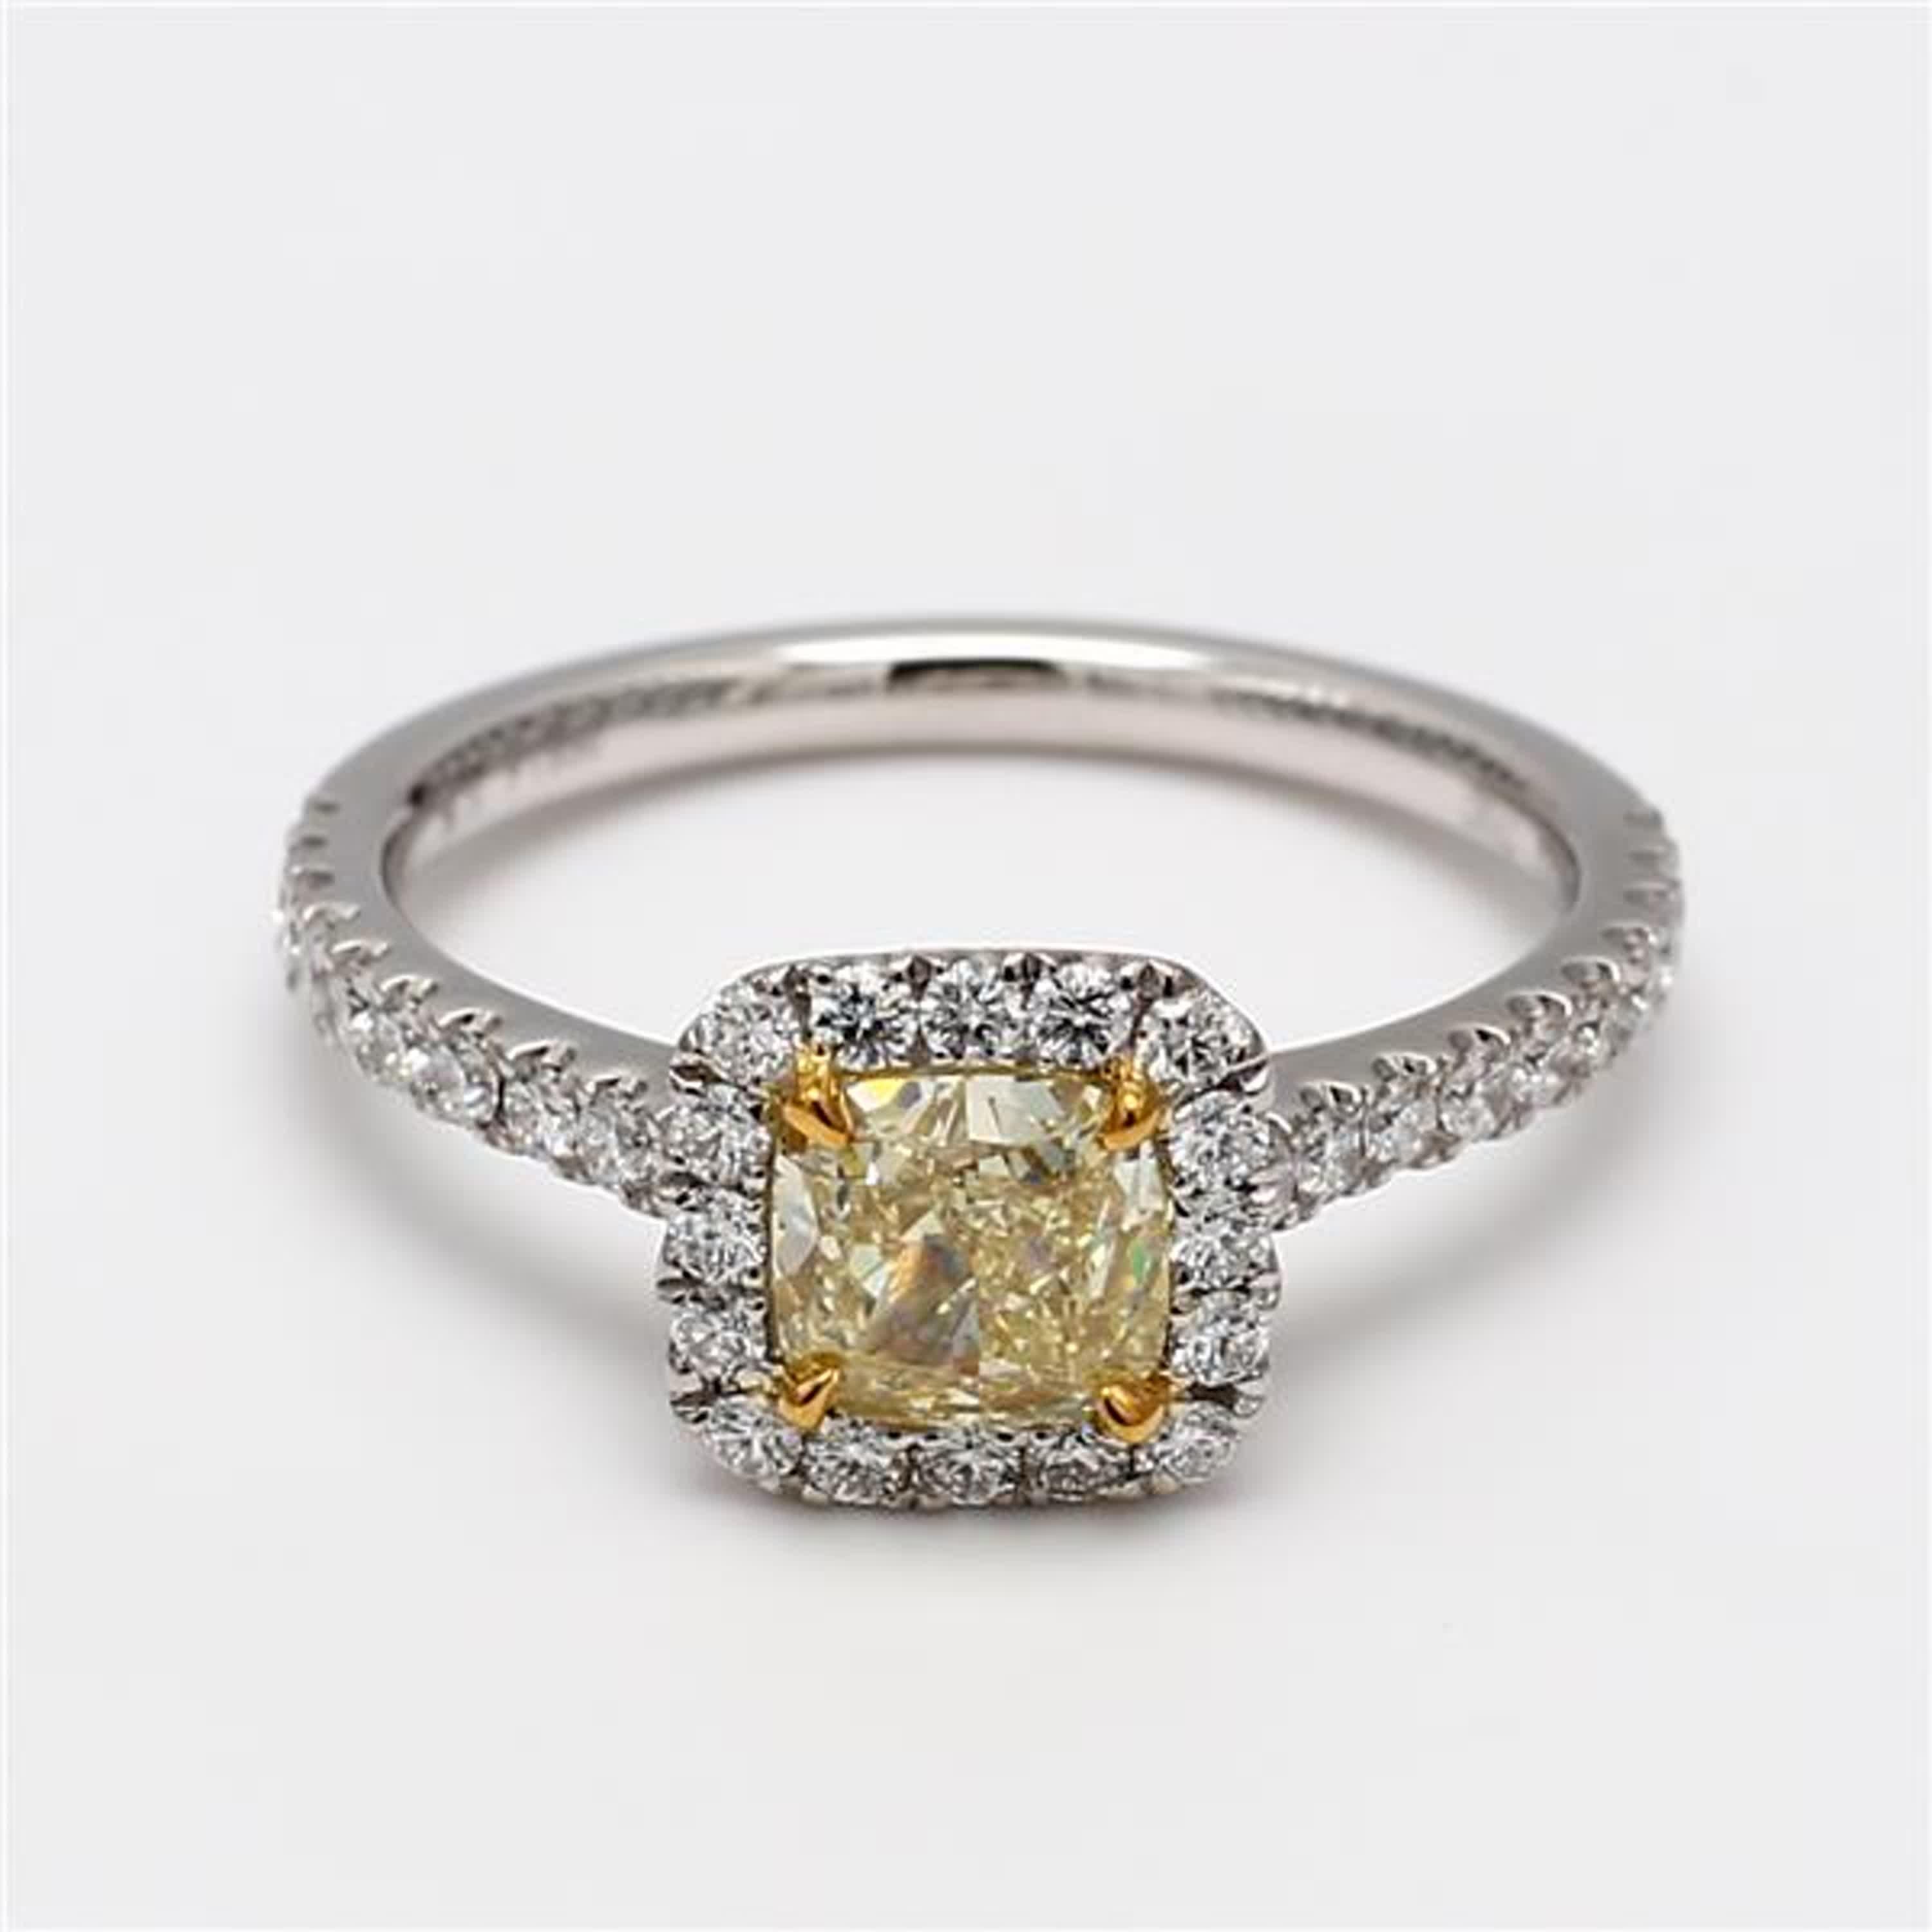 RareGemWorld's classic GIA certified diamond ring. Mounted in a beautiful Platinum/18K Yellow and White Gold setting with a natural cushion cut yellow diamond. The yellow diamond is surrounded by round natural white diamond melee. This ring is